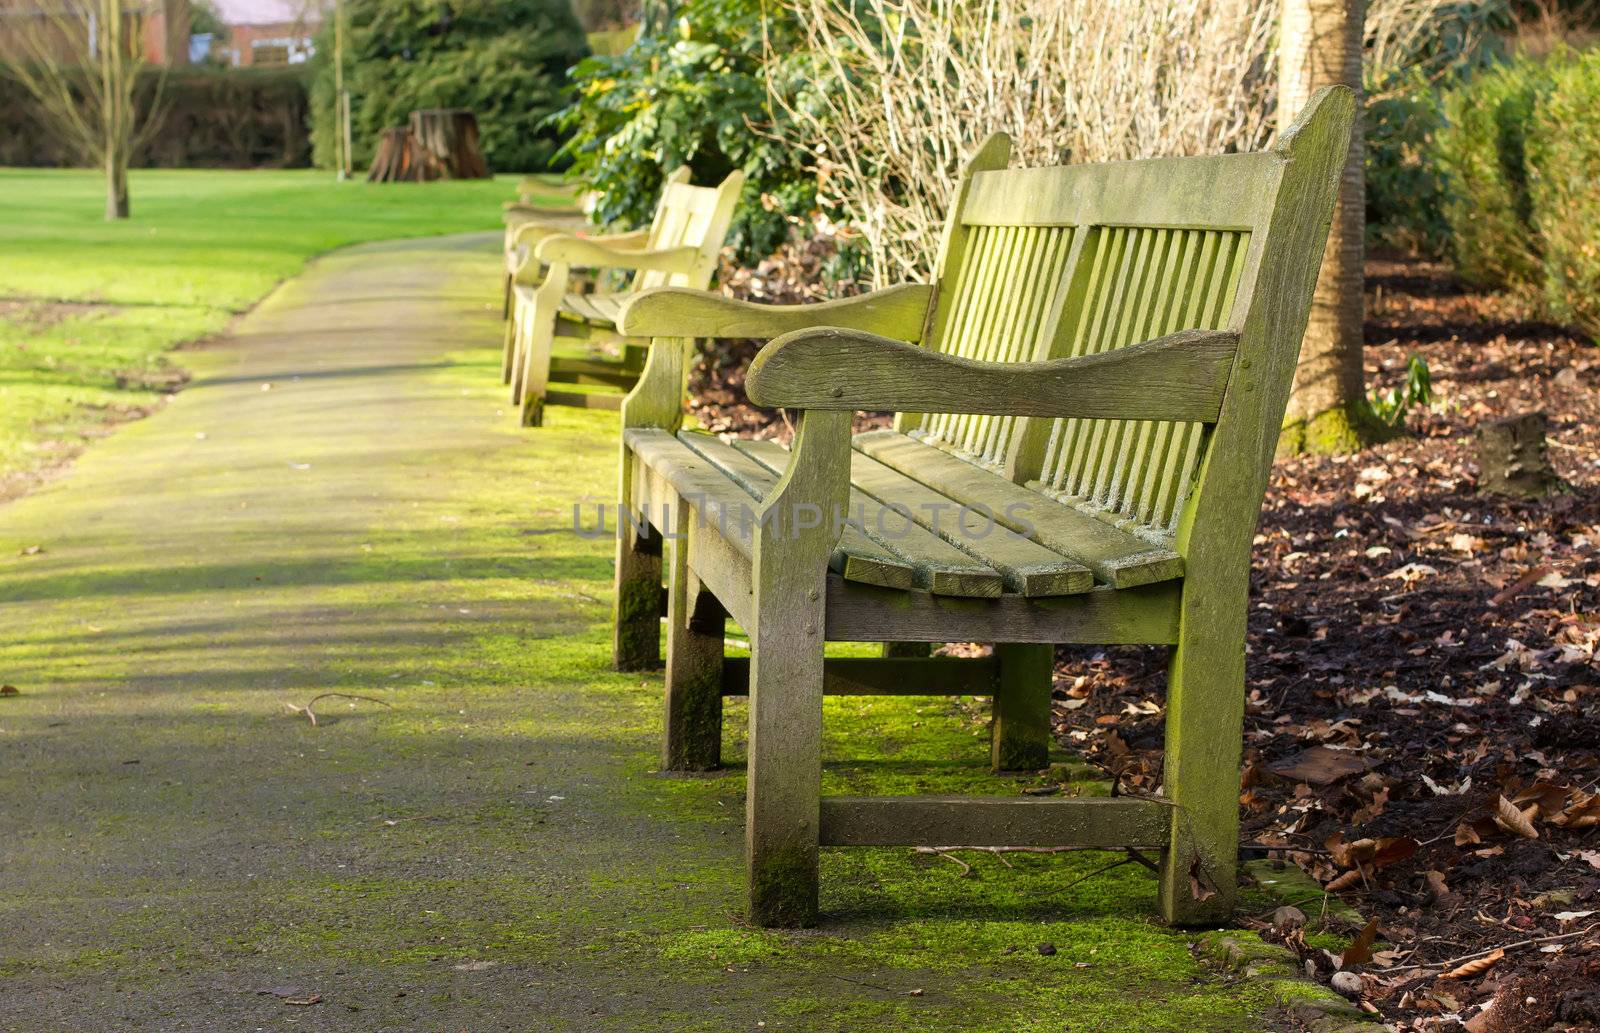 park bench on a cold winters day by smikeymikey1